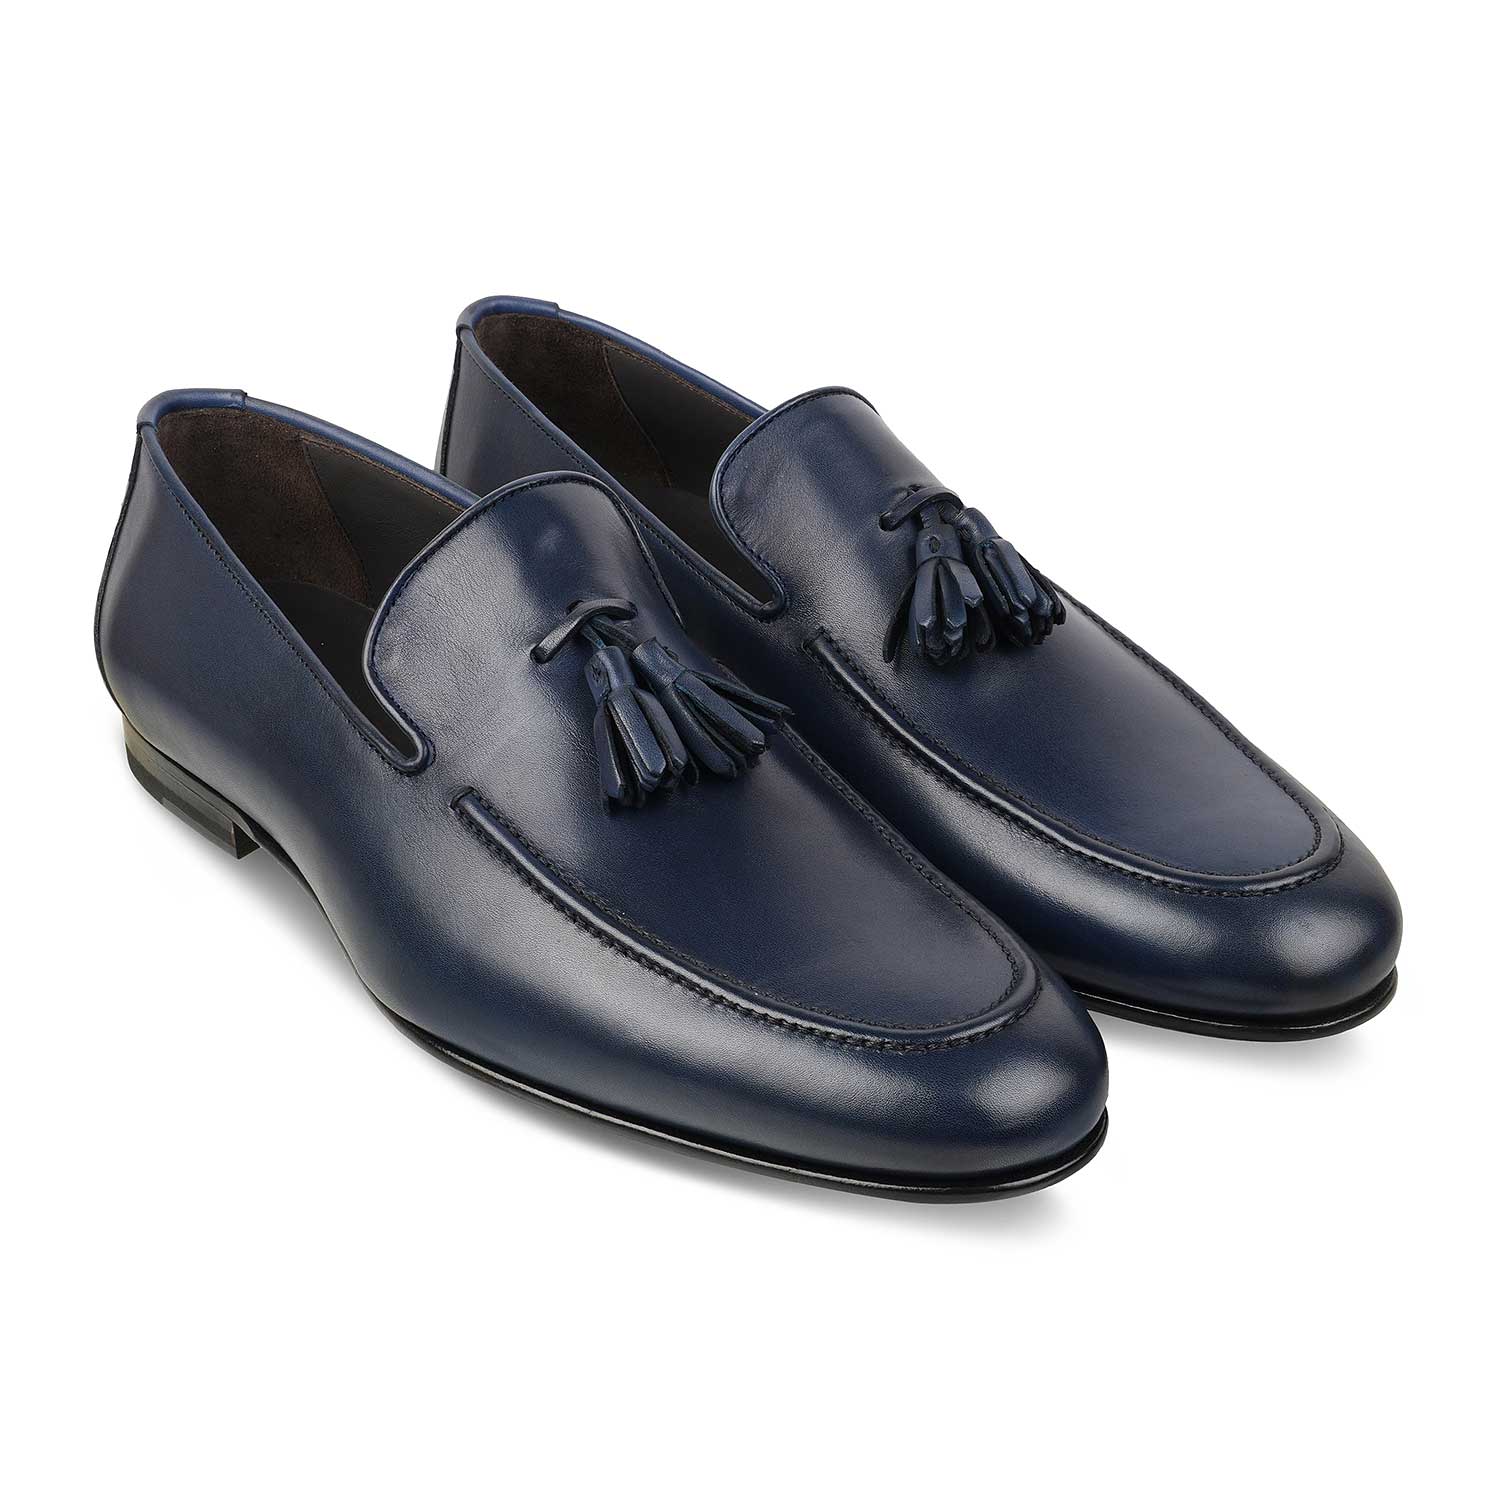 The Mancio Blue Men's Handcrafted Leather Loafers Tresmode - Tresmode